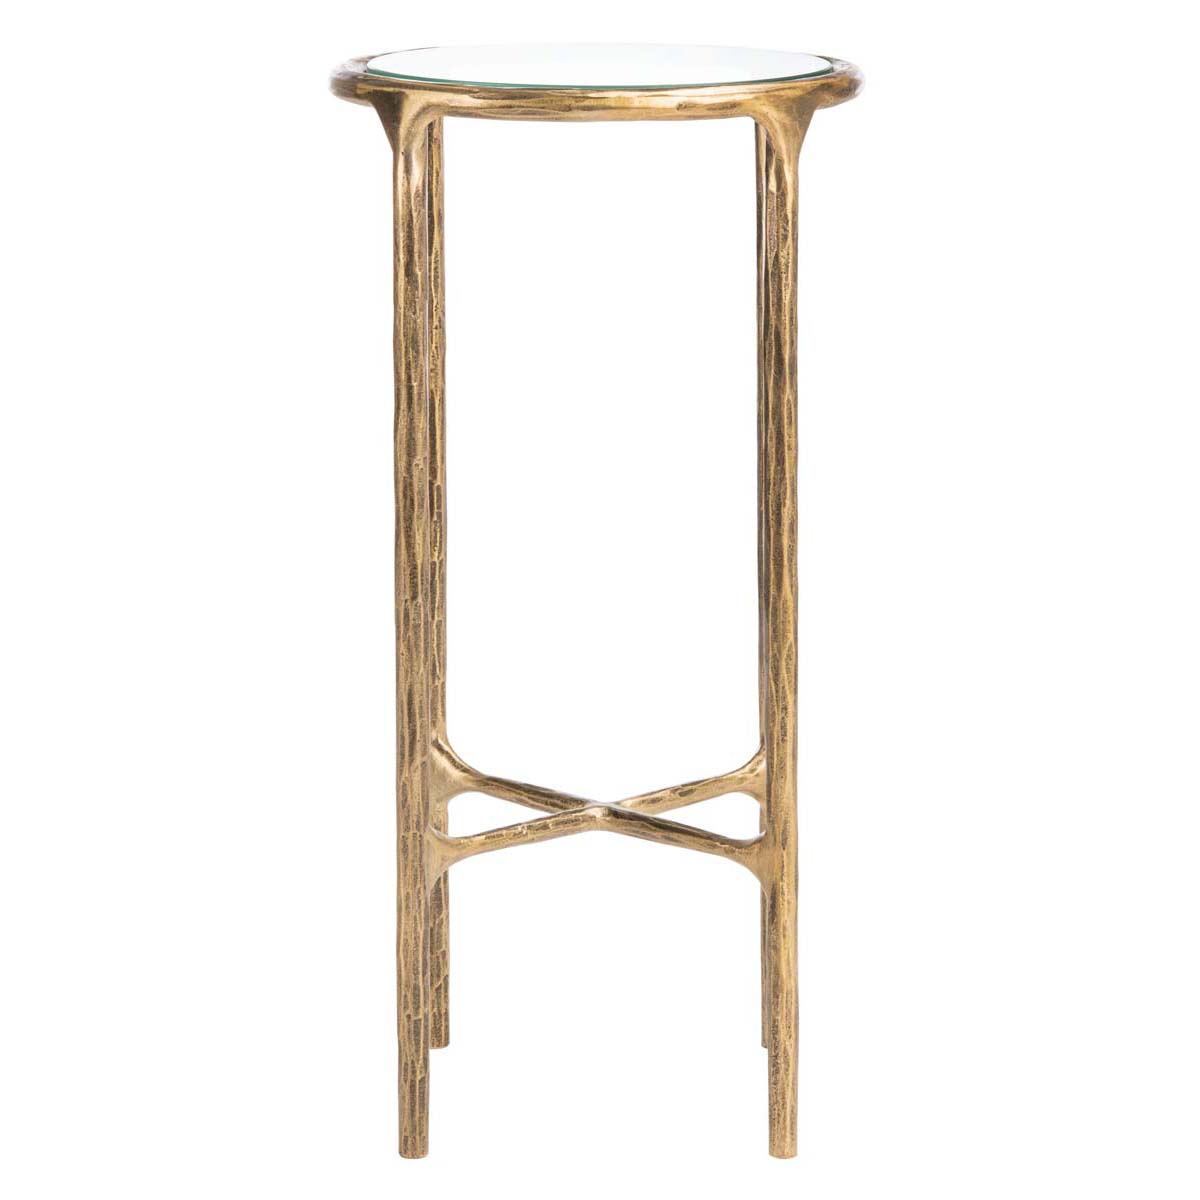 Safavieh Couture Jessa Forged Metal Tall Round End Table - Brass